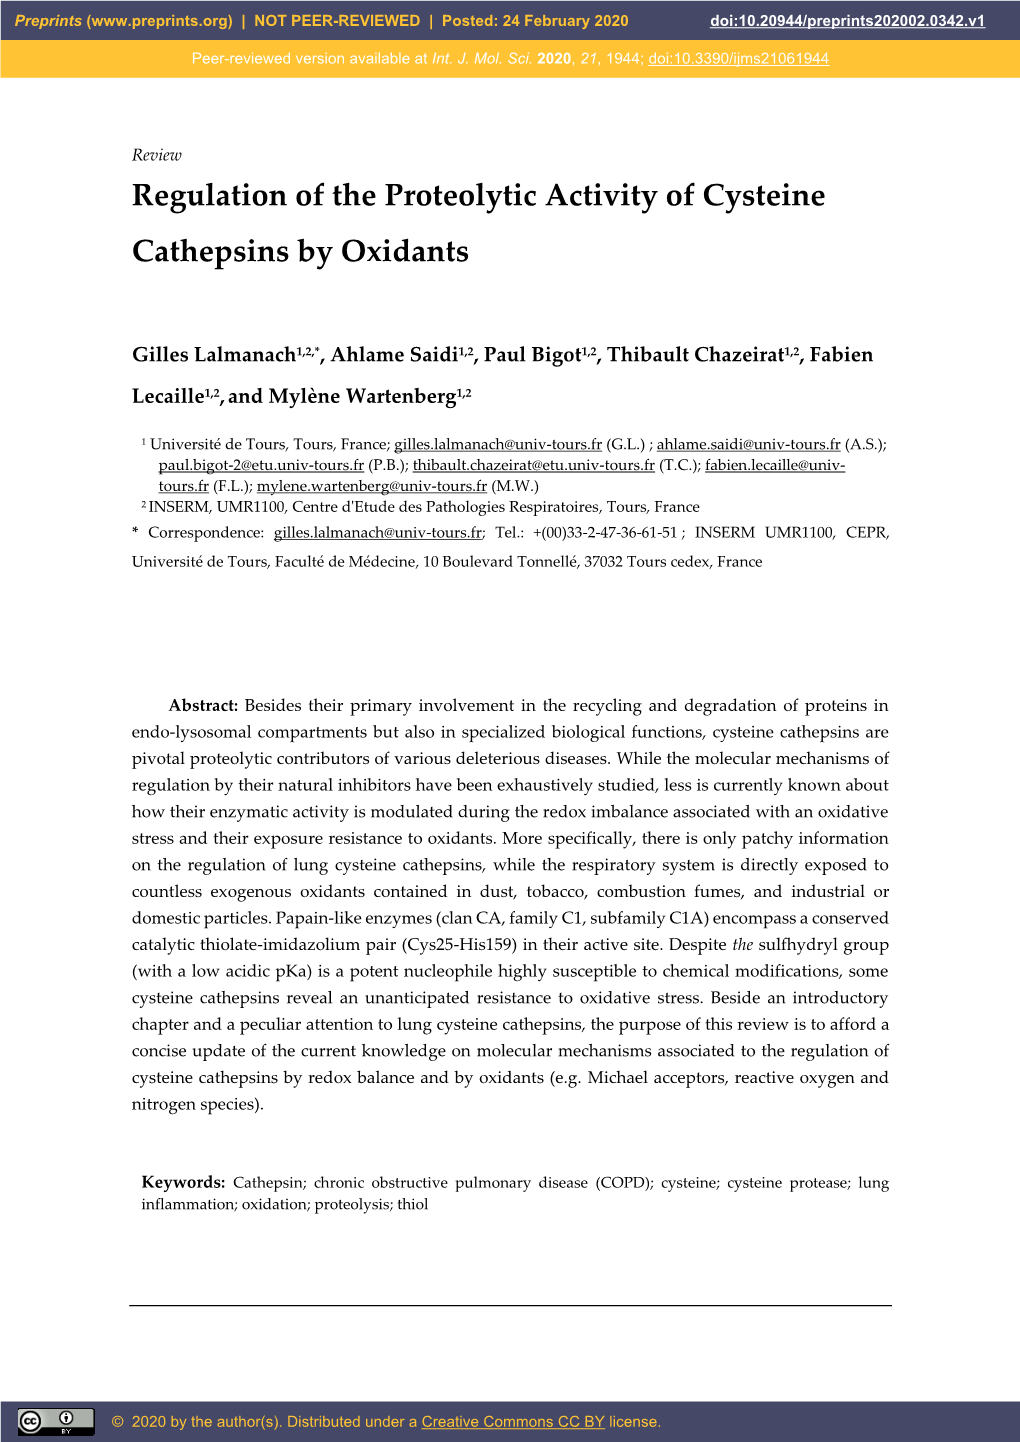 Regulation of the Proteolytic Activity of Cysteine Cathepsins by Oxidants